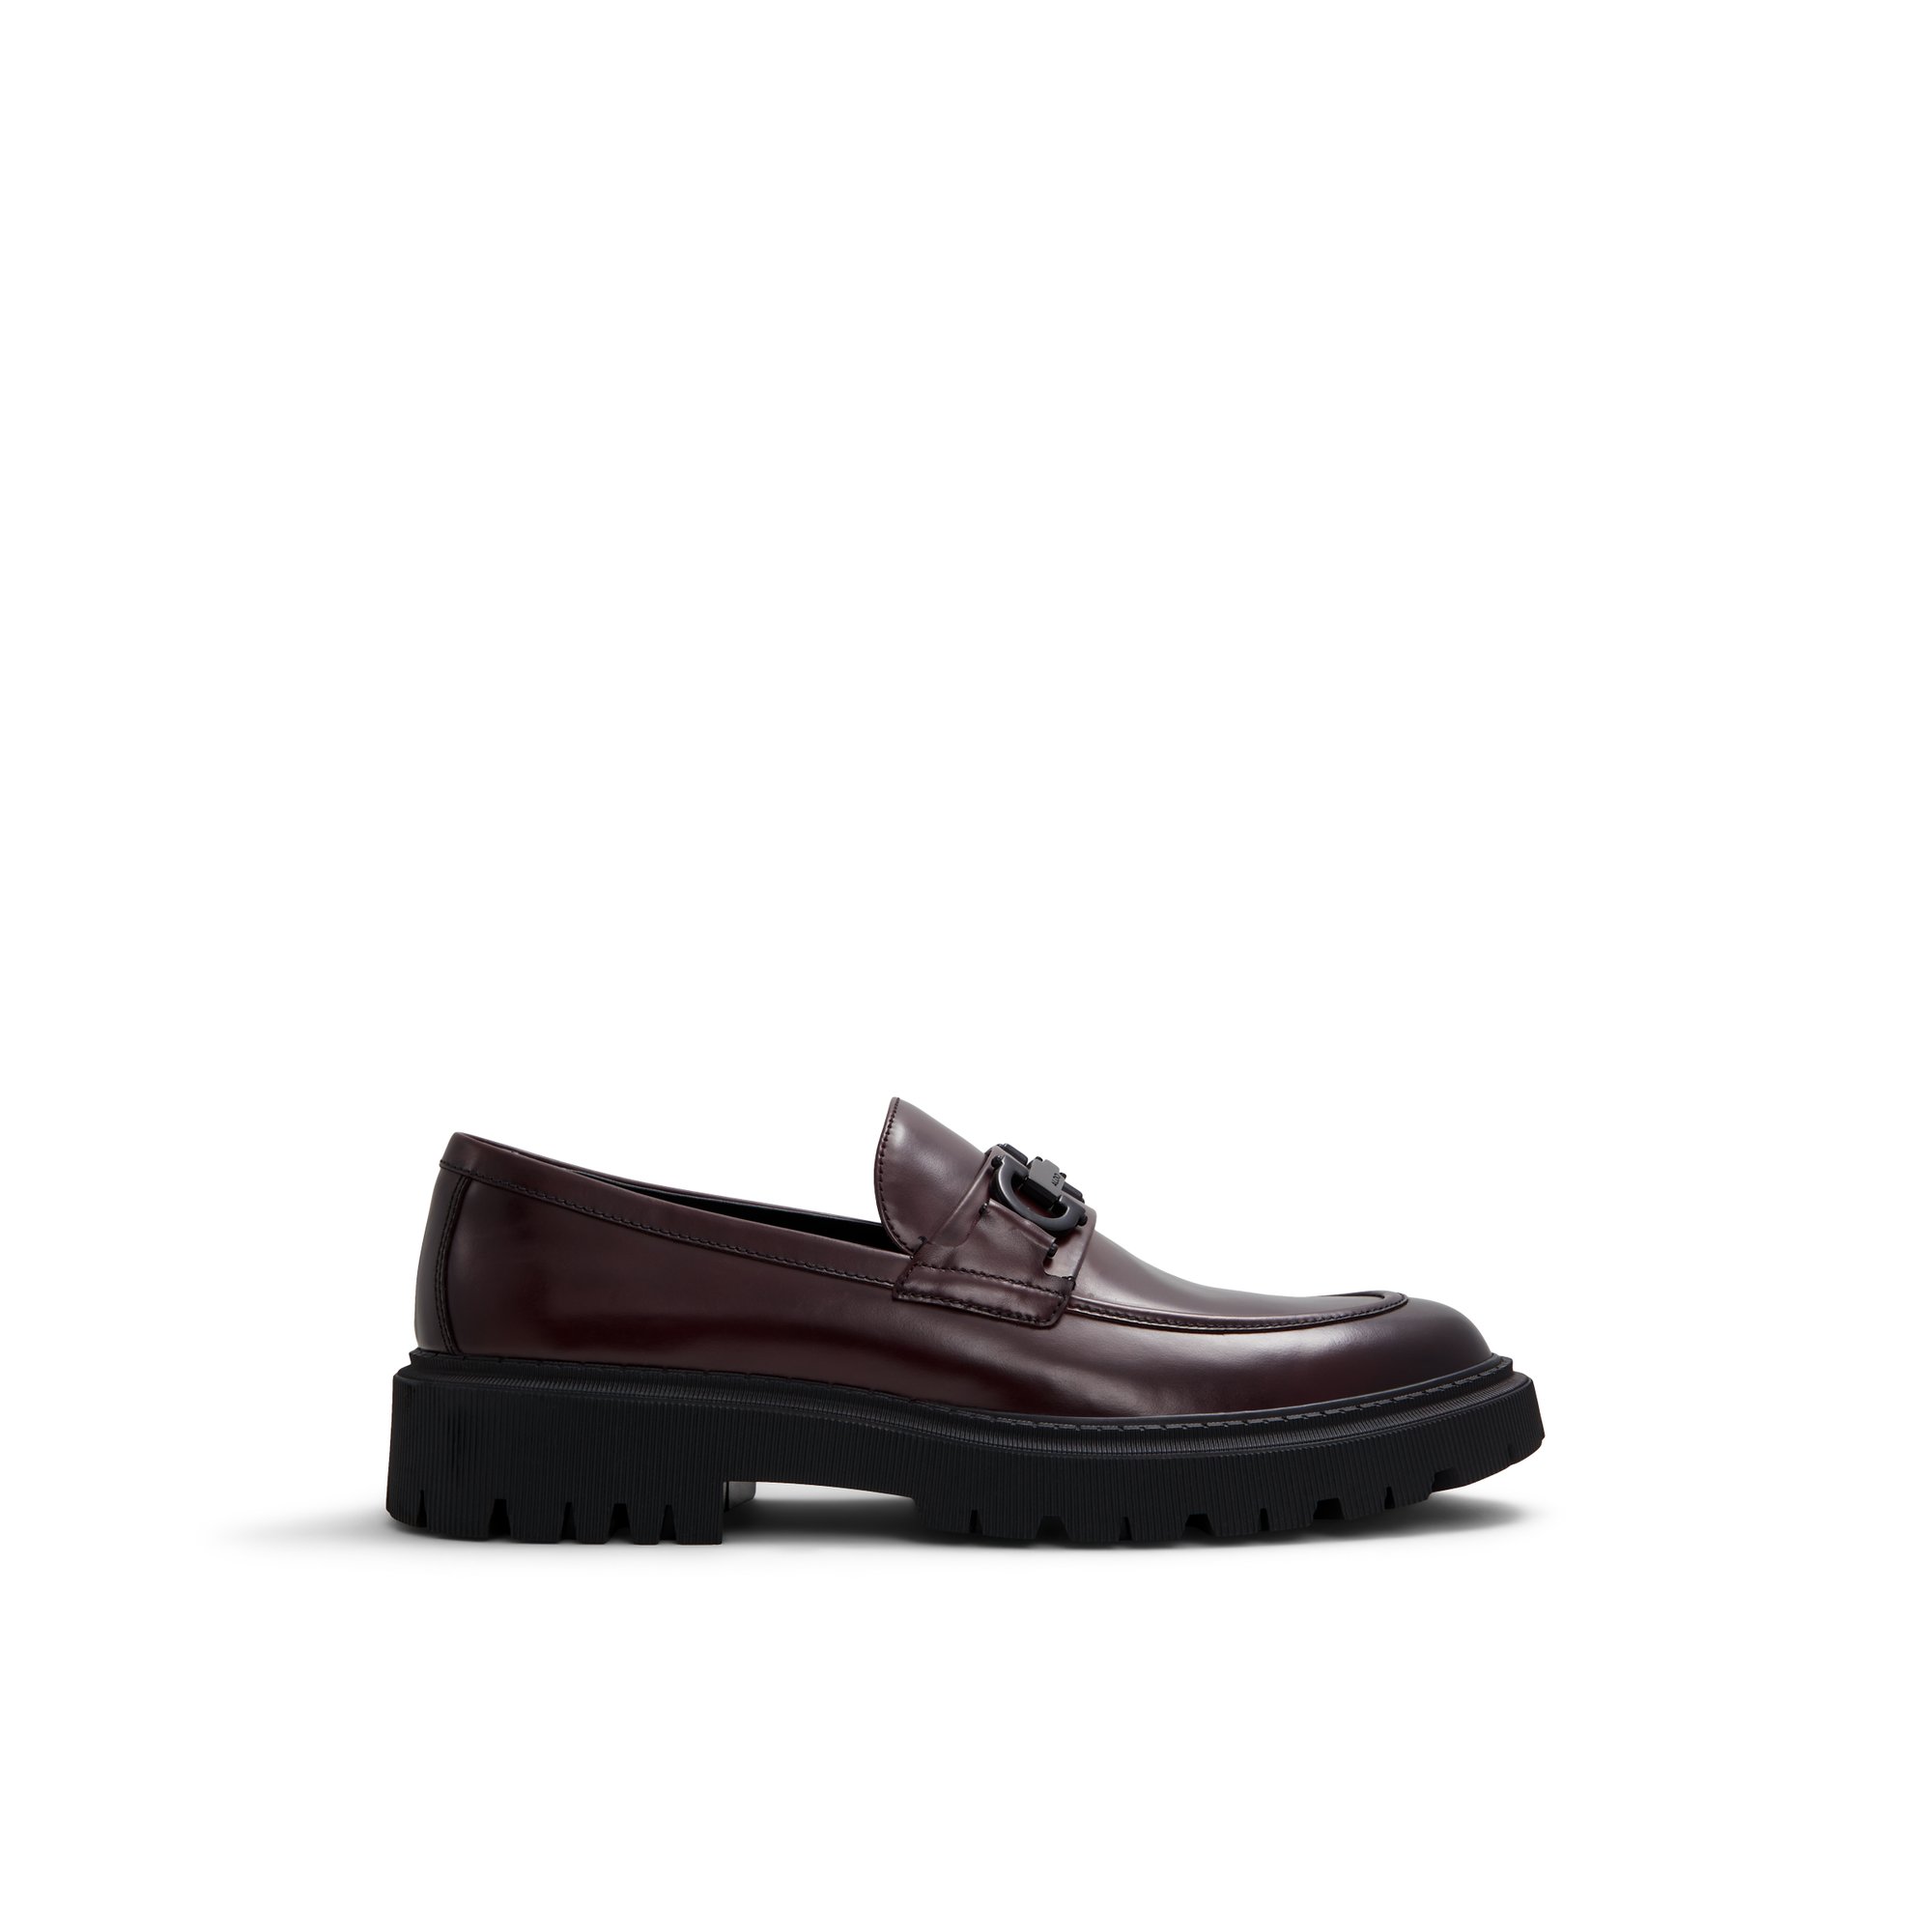 ALDO Fairford - Men's Loafers and Slip on - Red